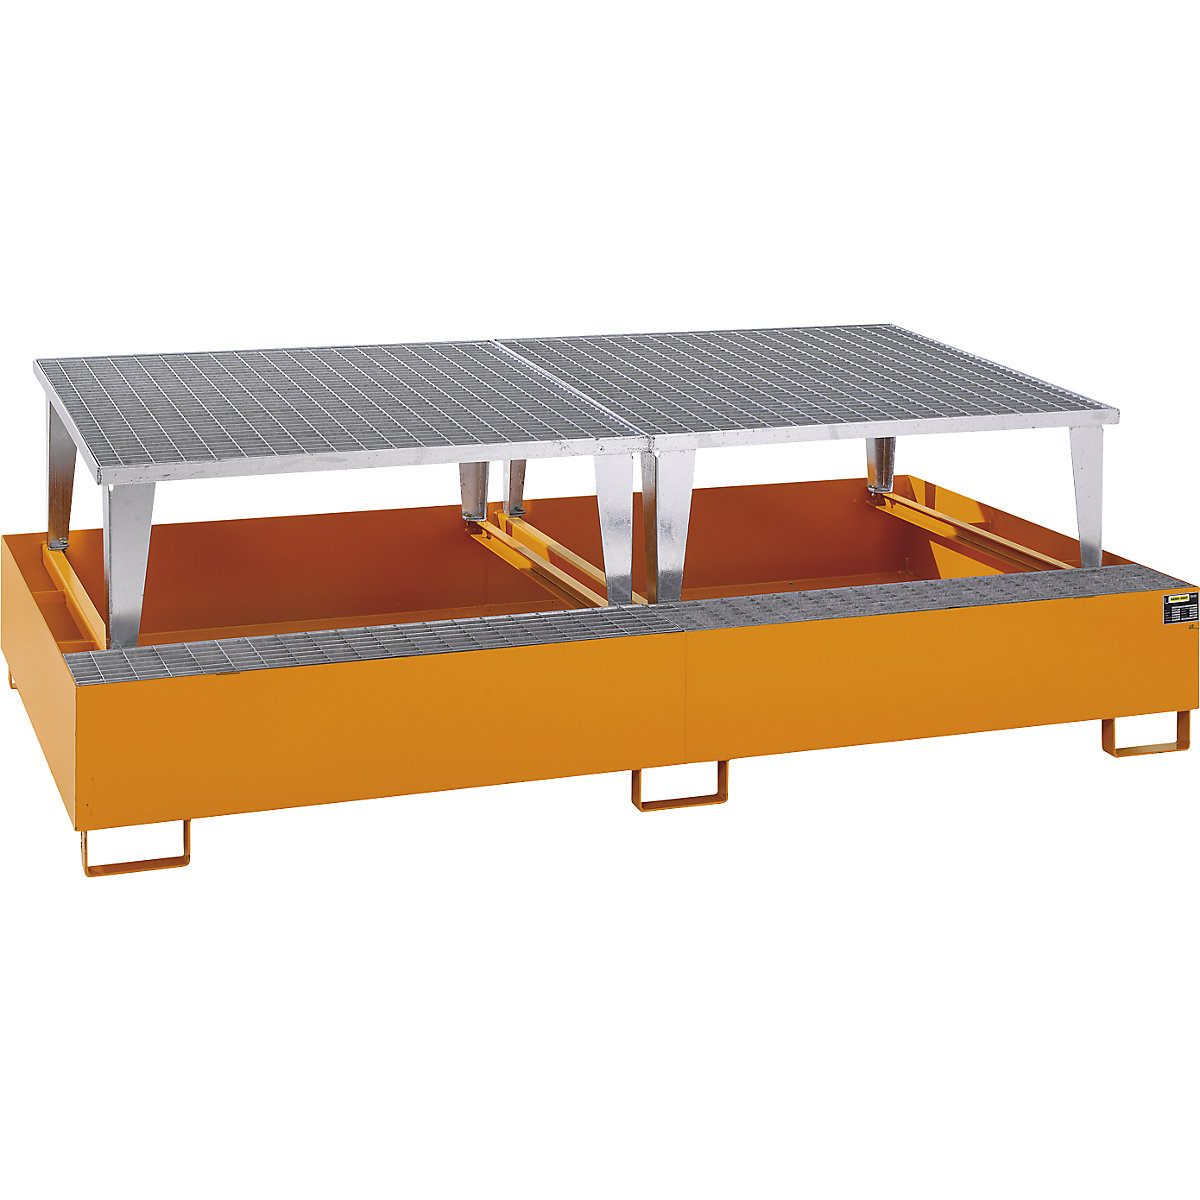 Steel sump tray for IBC/CTC tank containers – eurokraft pro, LxWxH 2650 x 1460 x 865 mm, with 2 filling attachments, sump capacity 1000 l, painted, orange RAL 2000-2